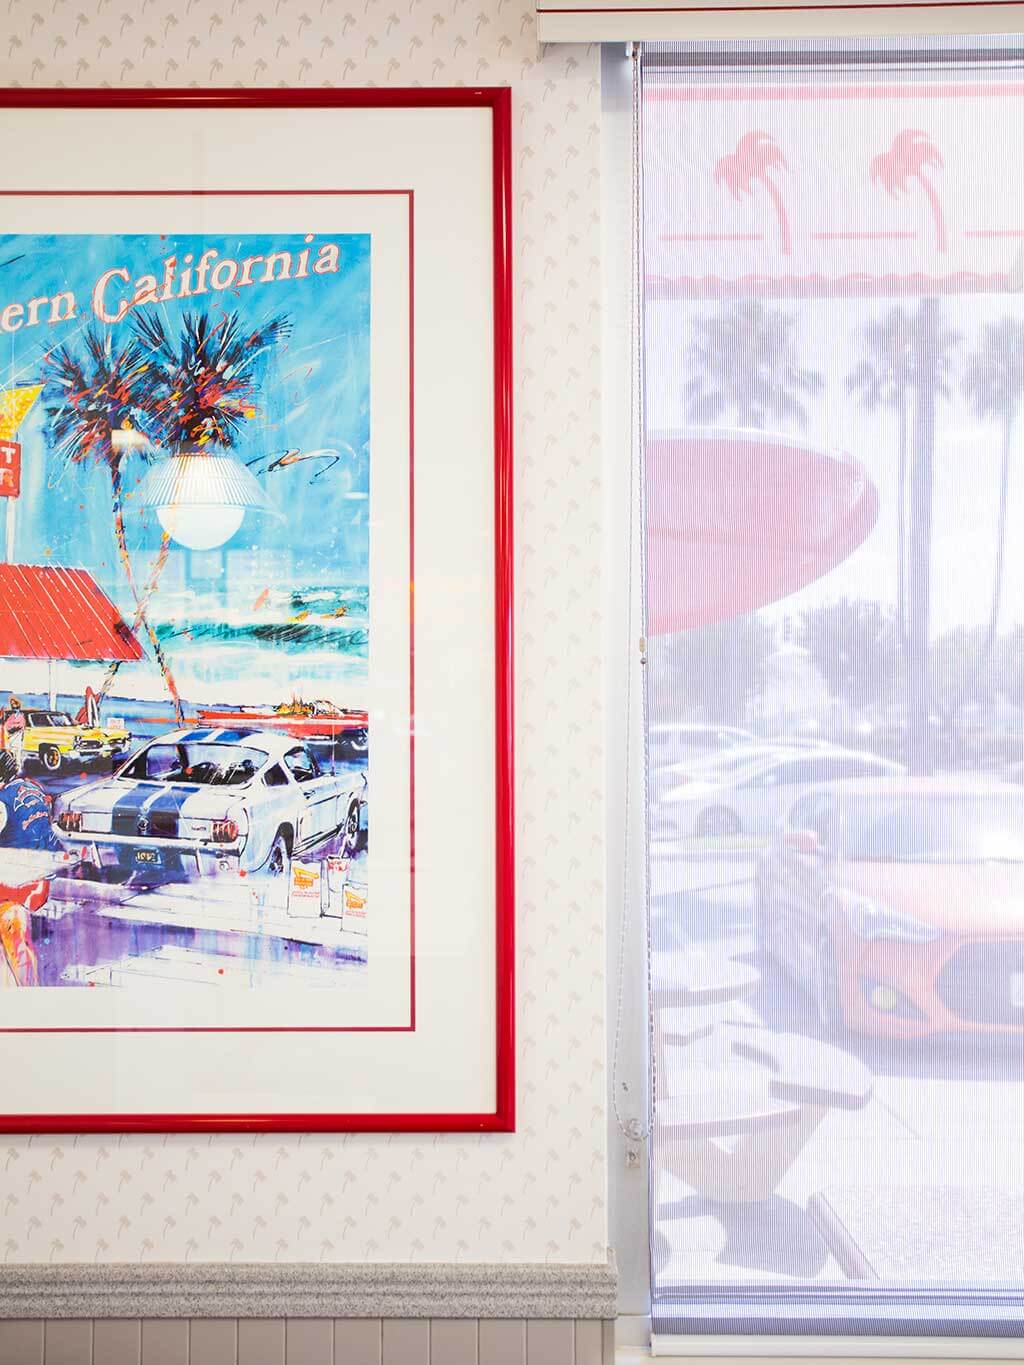 drive-swim-fly-in-n-out-burger-gilroy-california-cheeseburgers-fast-food-west-coast-original-vintage-art